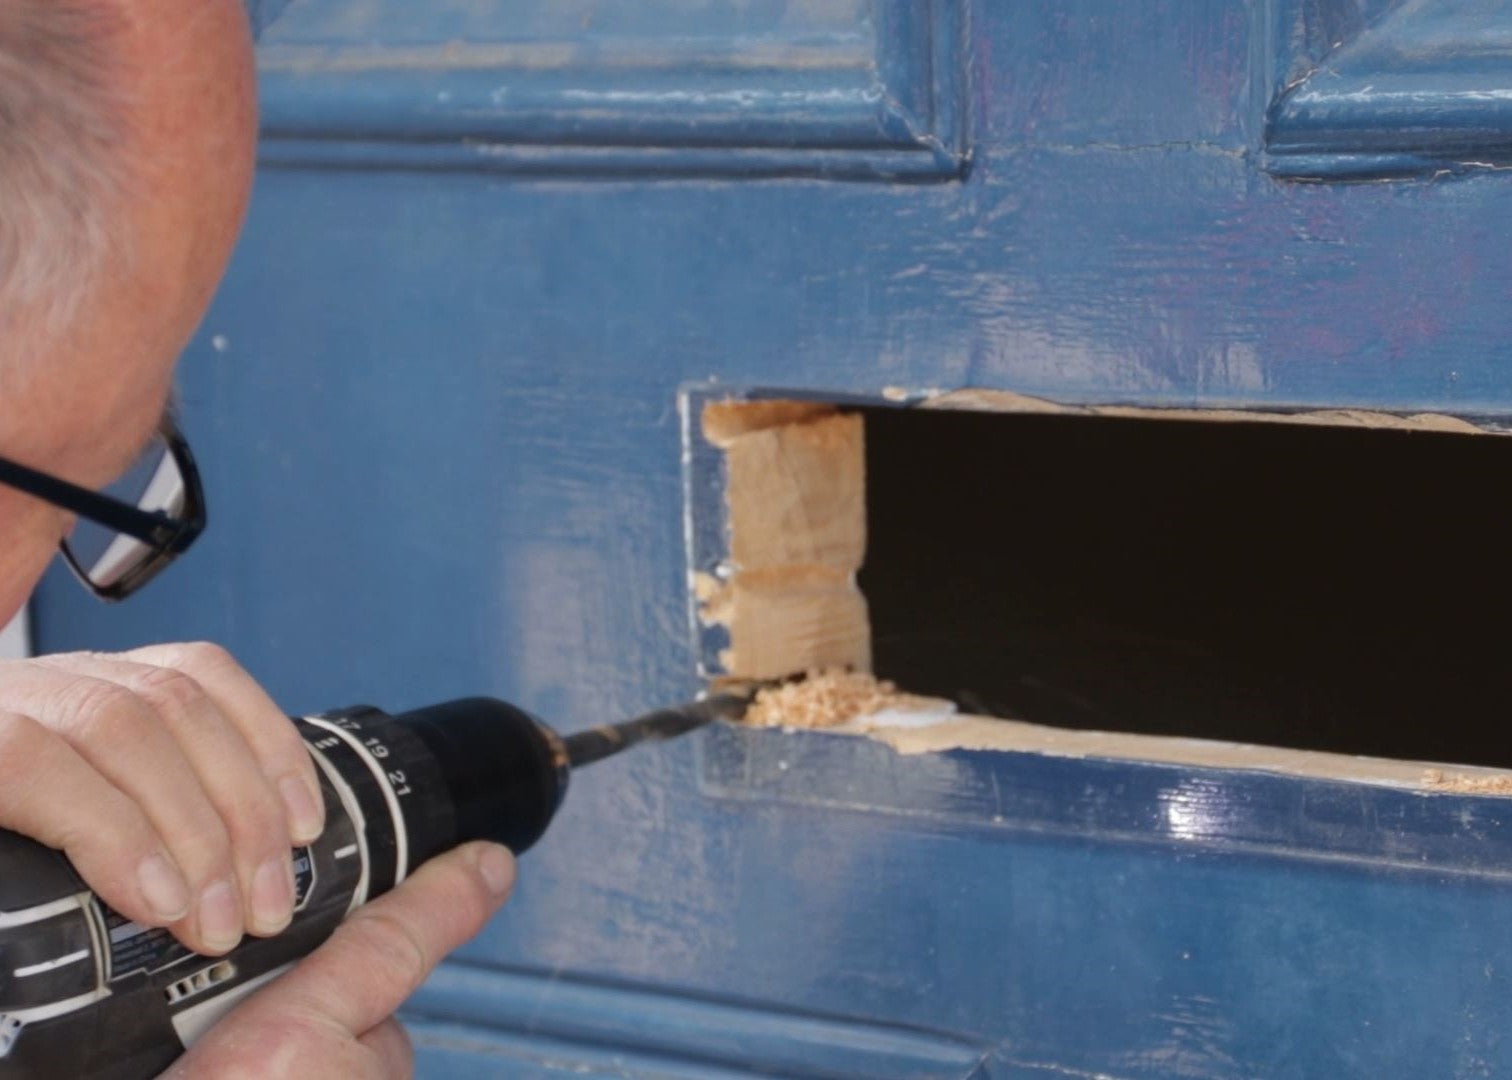 Man using an electric drill to drill a hole for a letterbox through a blue wooden door.